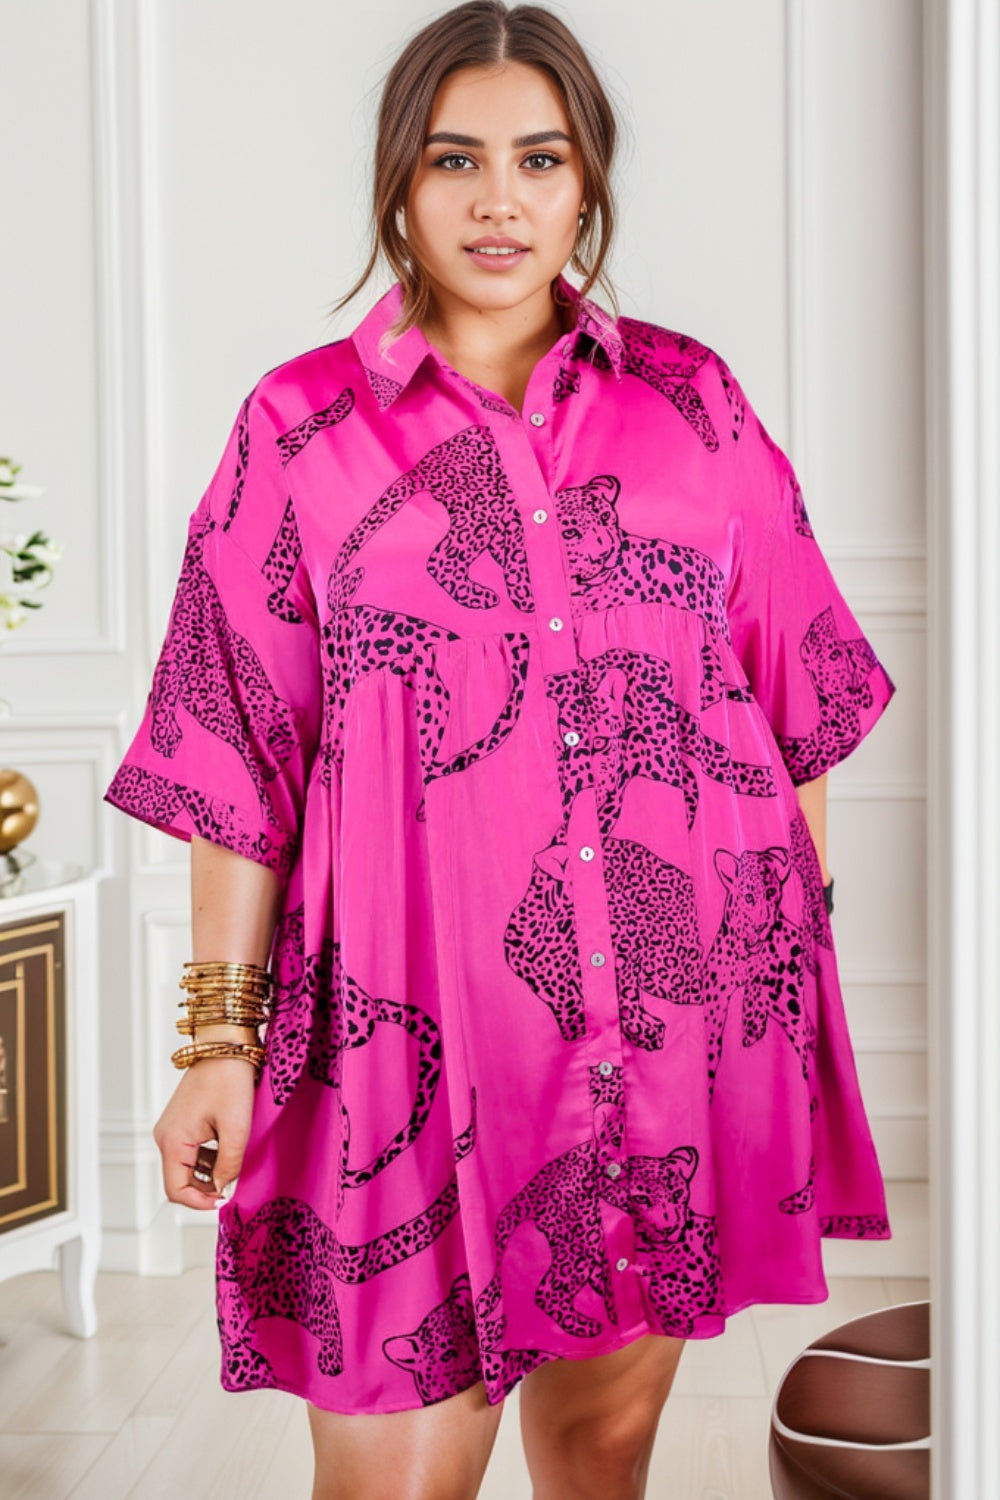 Elegant Plus Size Beach Wedding Guest Dress - Tiger Printed Button Up Half Sleeve for a Stunning Look at Any Summer Event